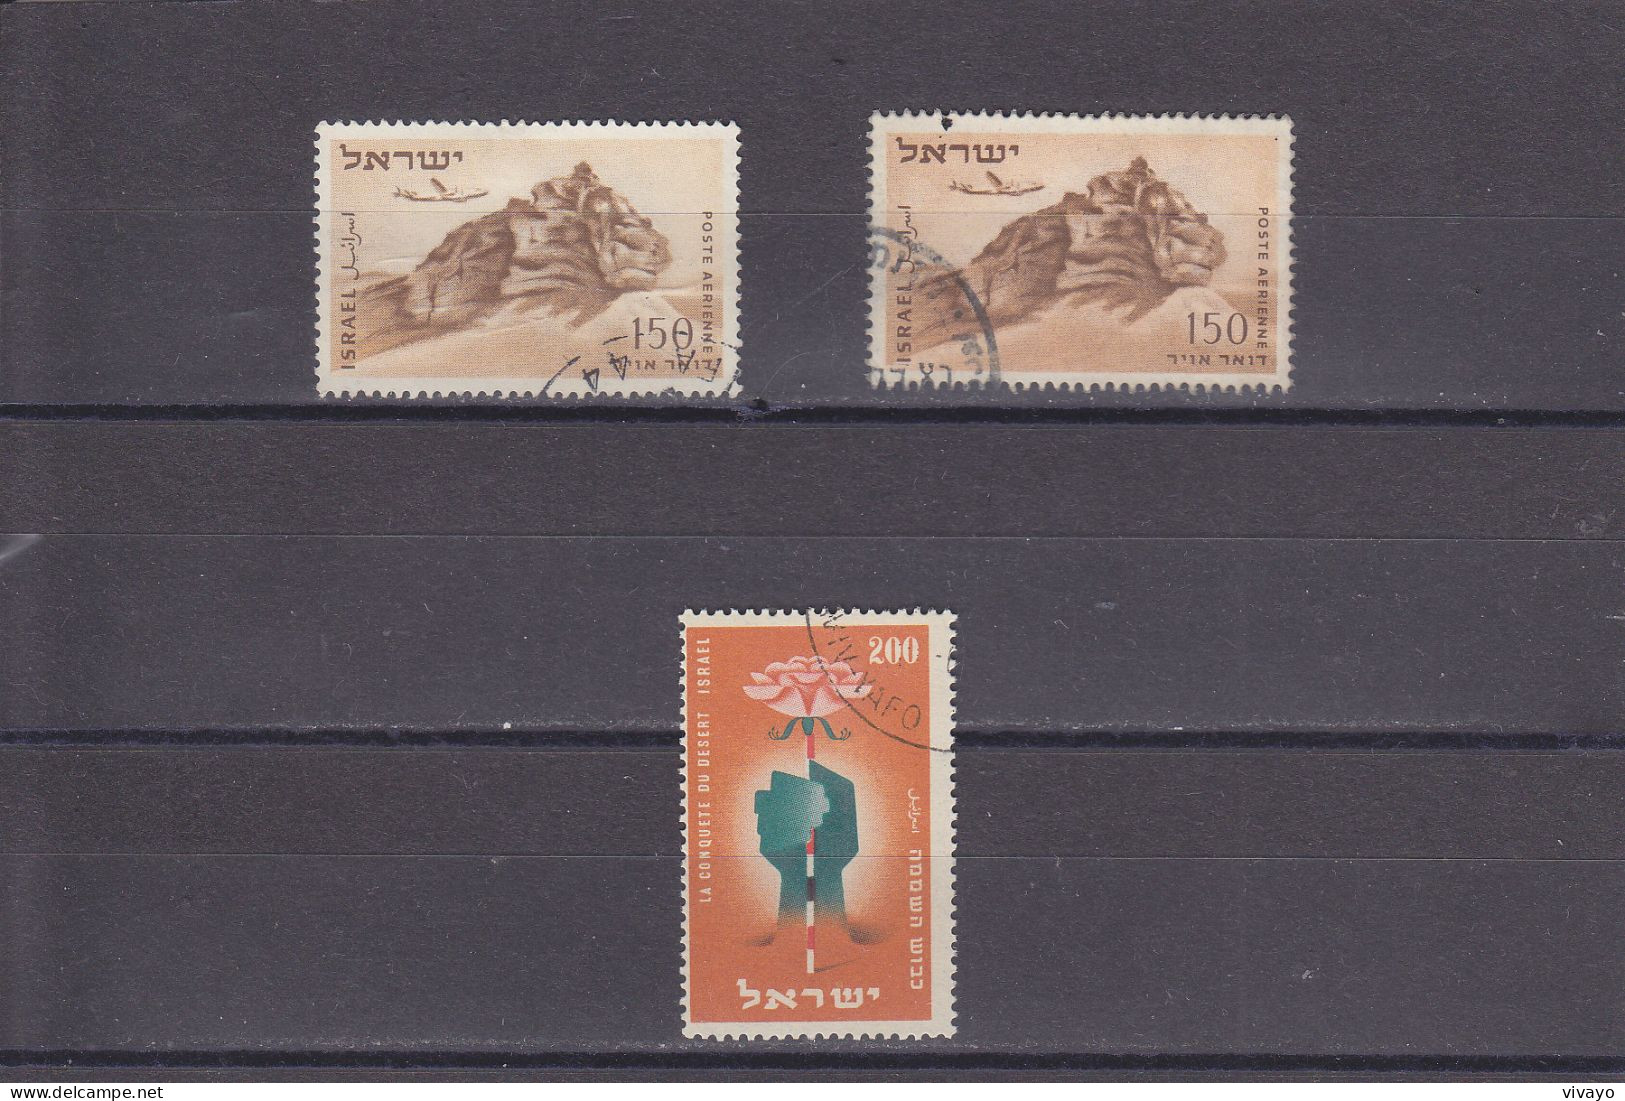 ISRAEL - O / FINE CANCELLED - 1953/1954 - AIRMAIL LION'S MOUNTAIN, DESERT FLOWER  - Yv. 71, PA 12   Mi. 83 (x2), 93 - Used Stamps (without Tabs)